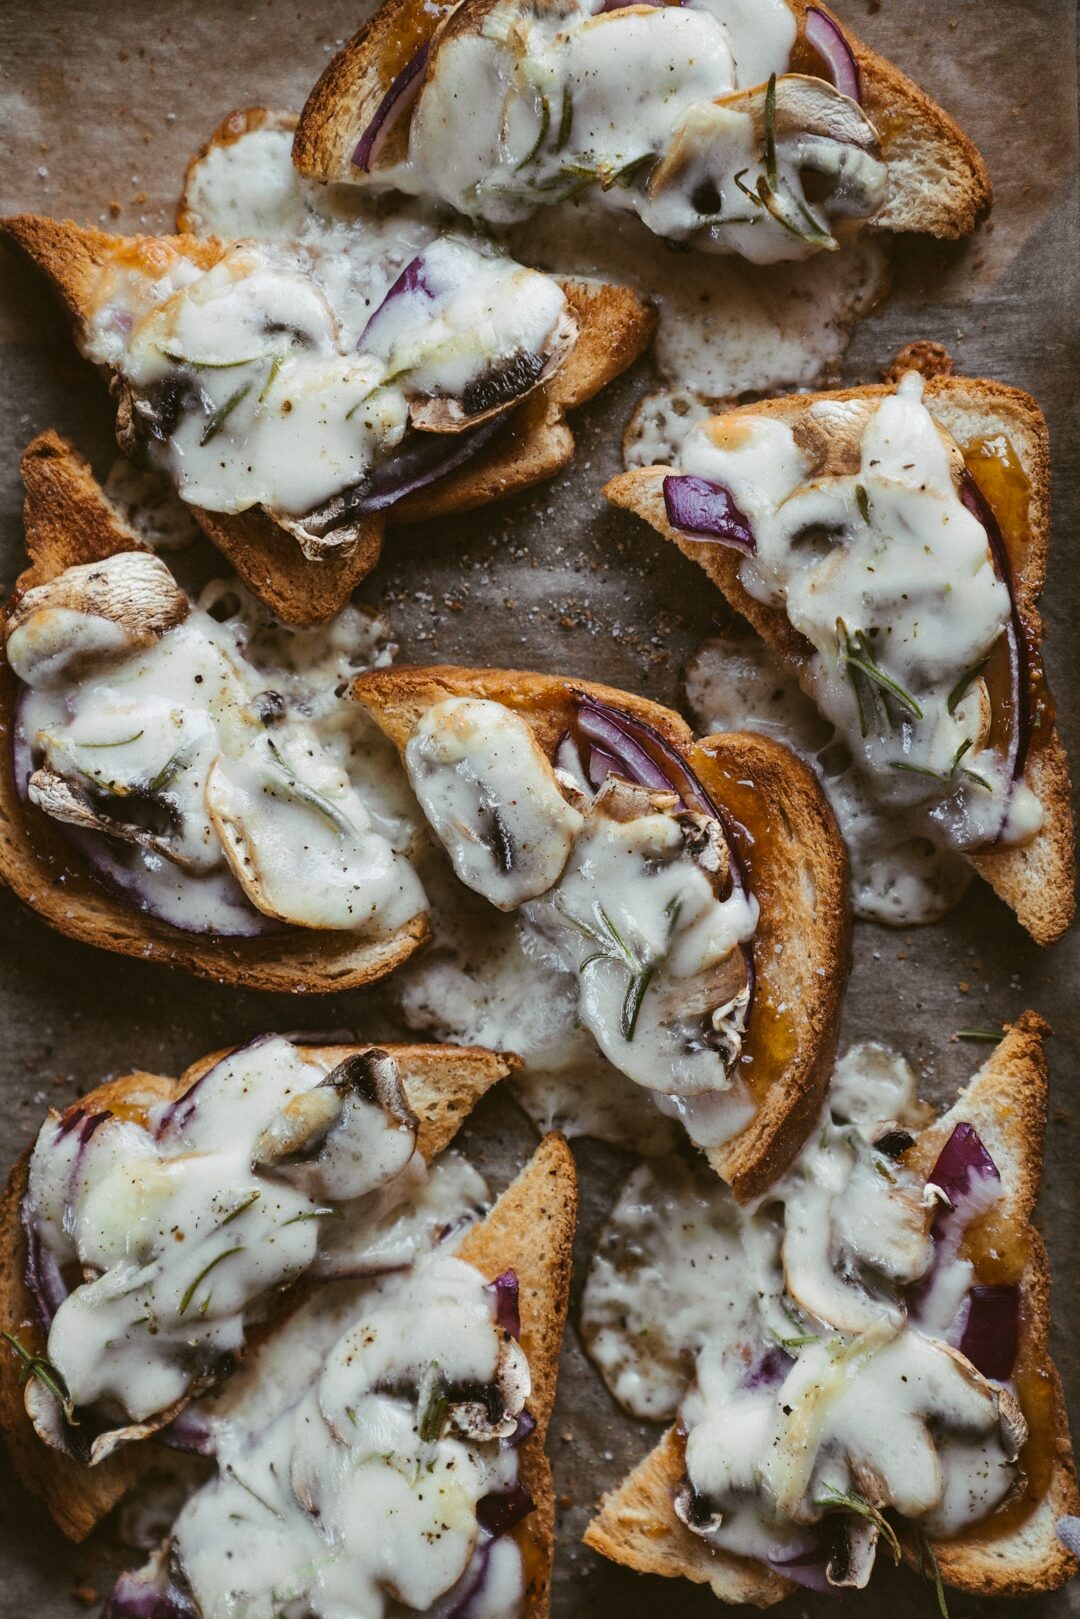 Hot Sweet And Savoury Crostini With Cheese And Mushrooms